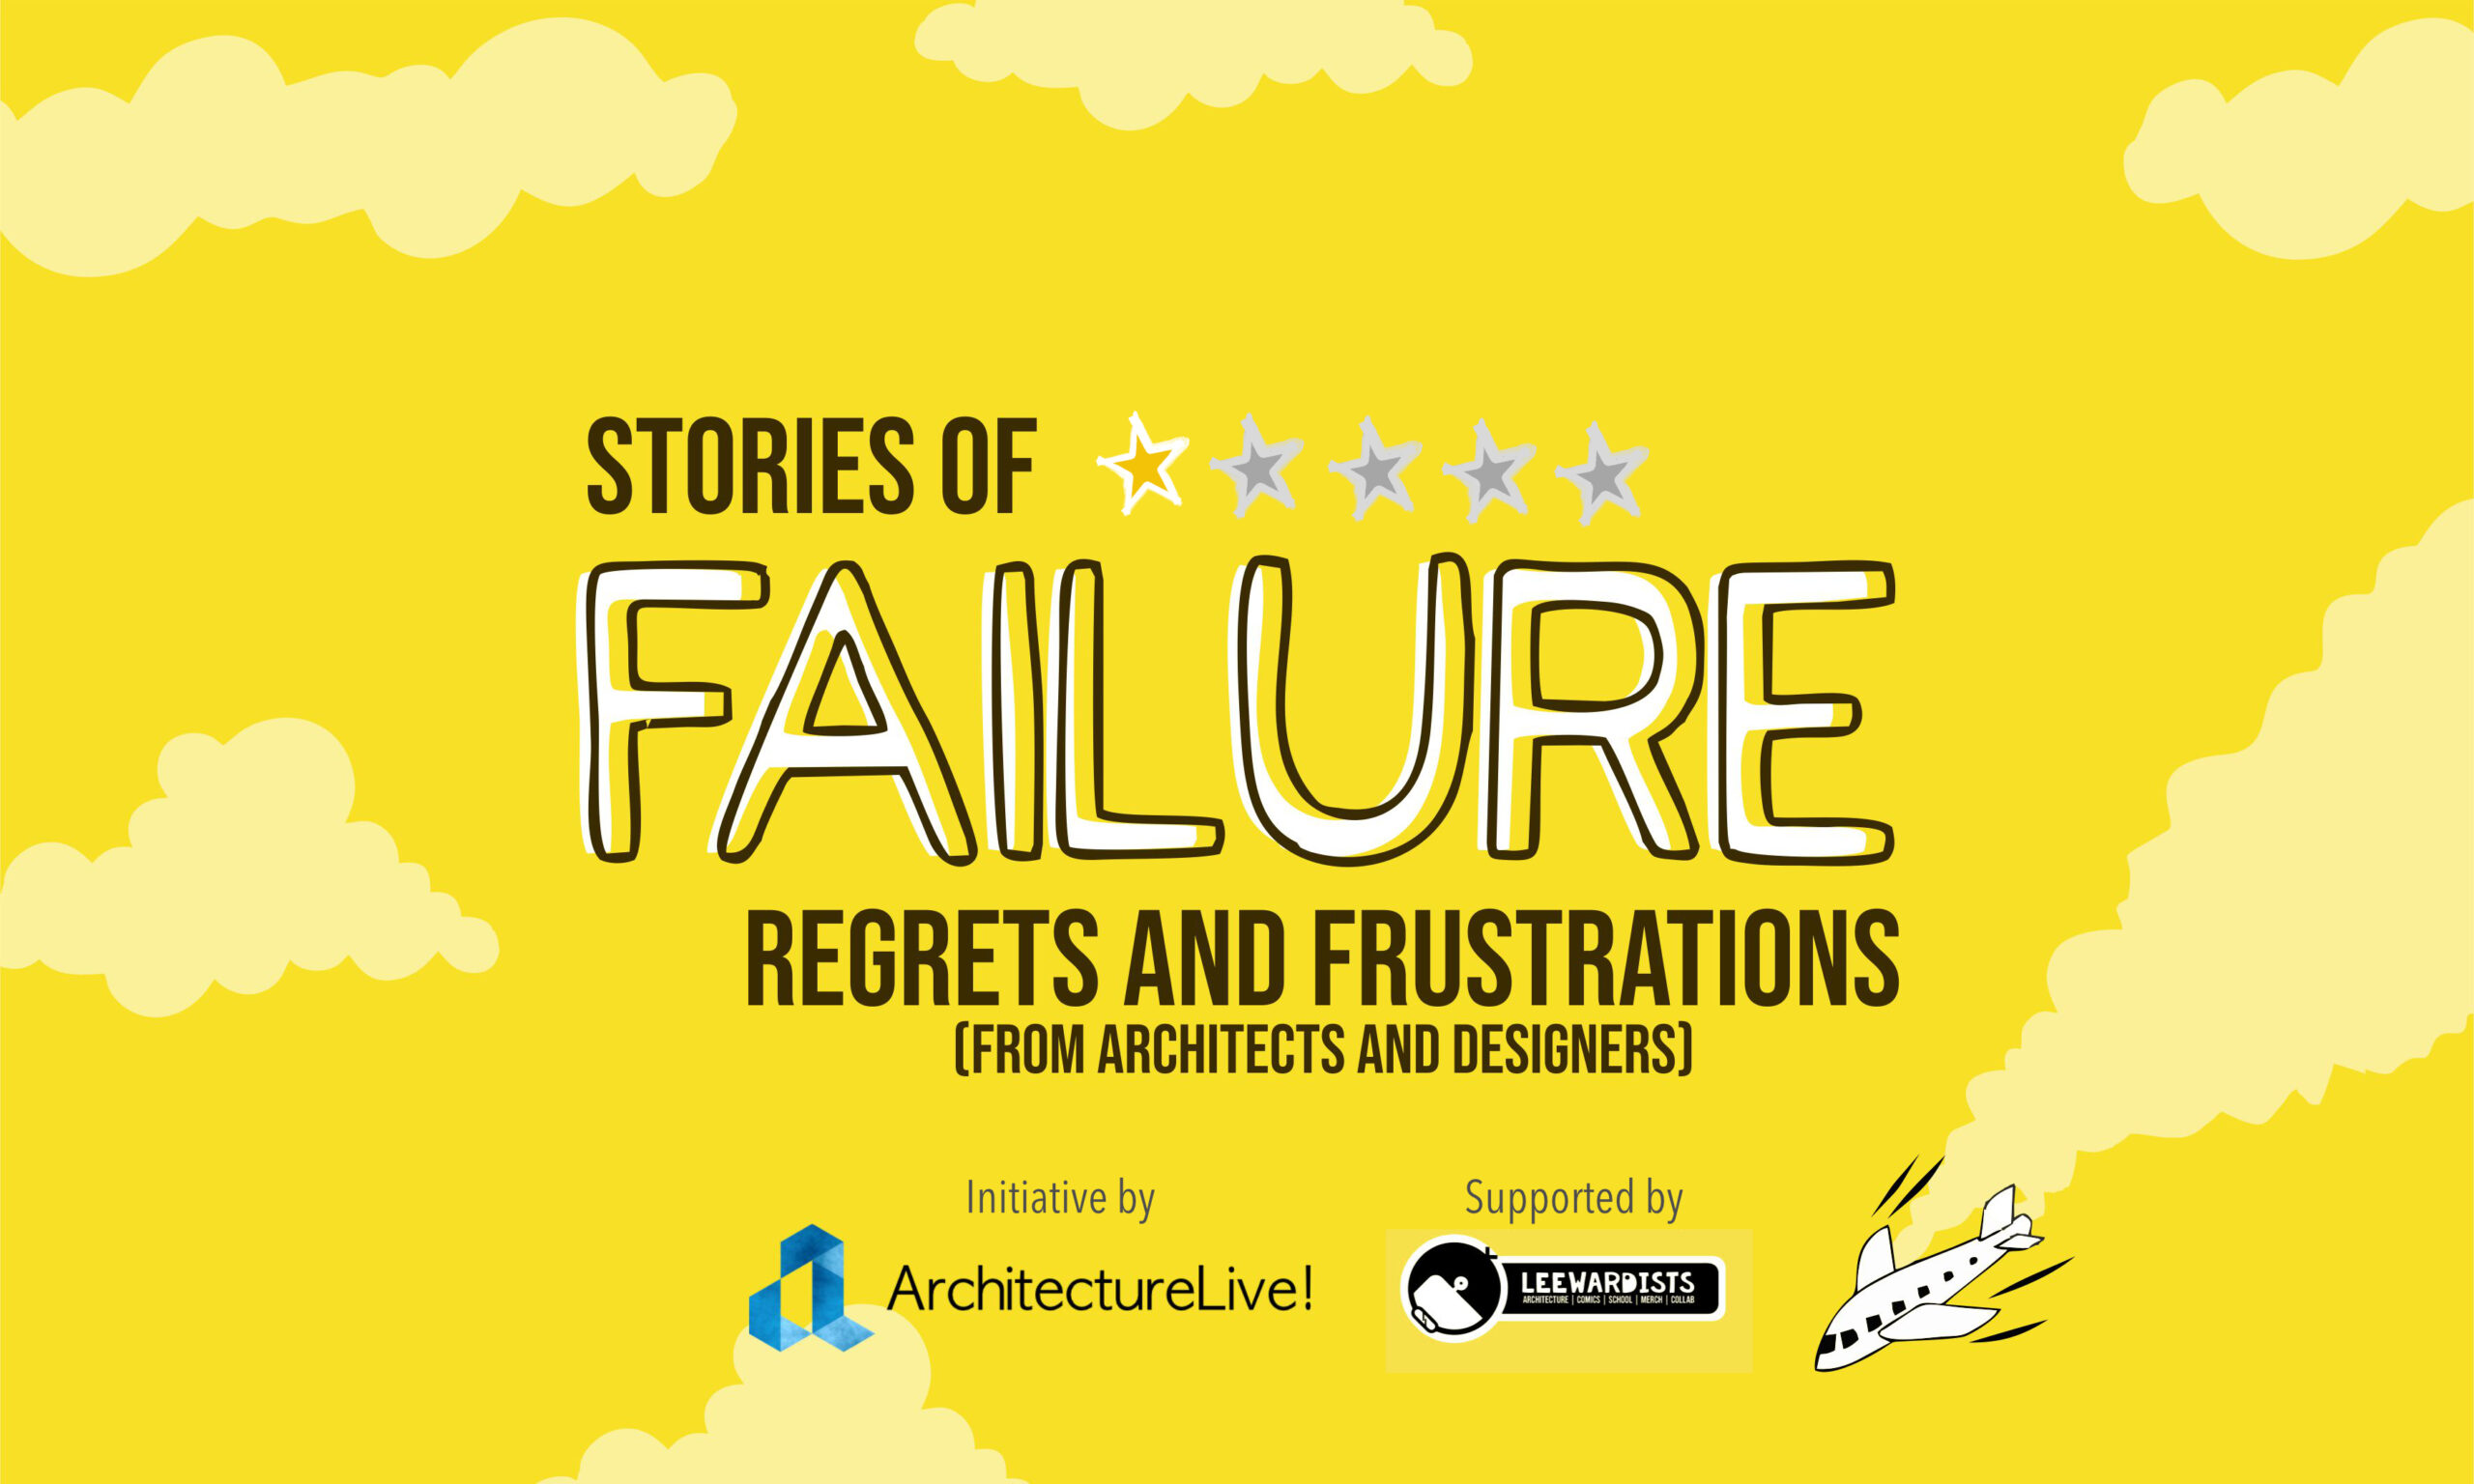 Stories of Failure